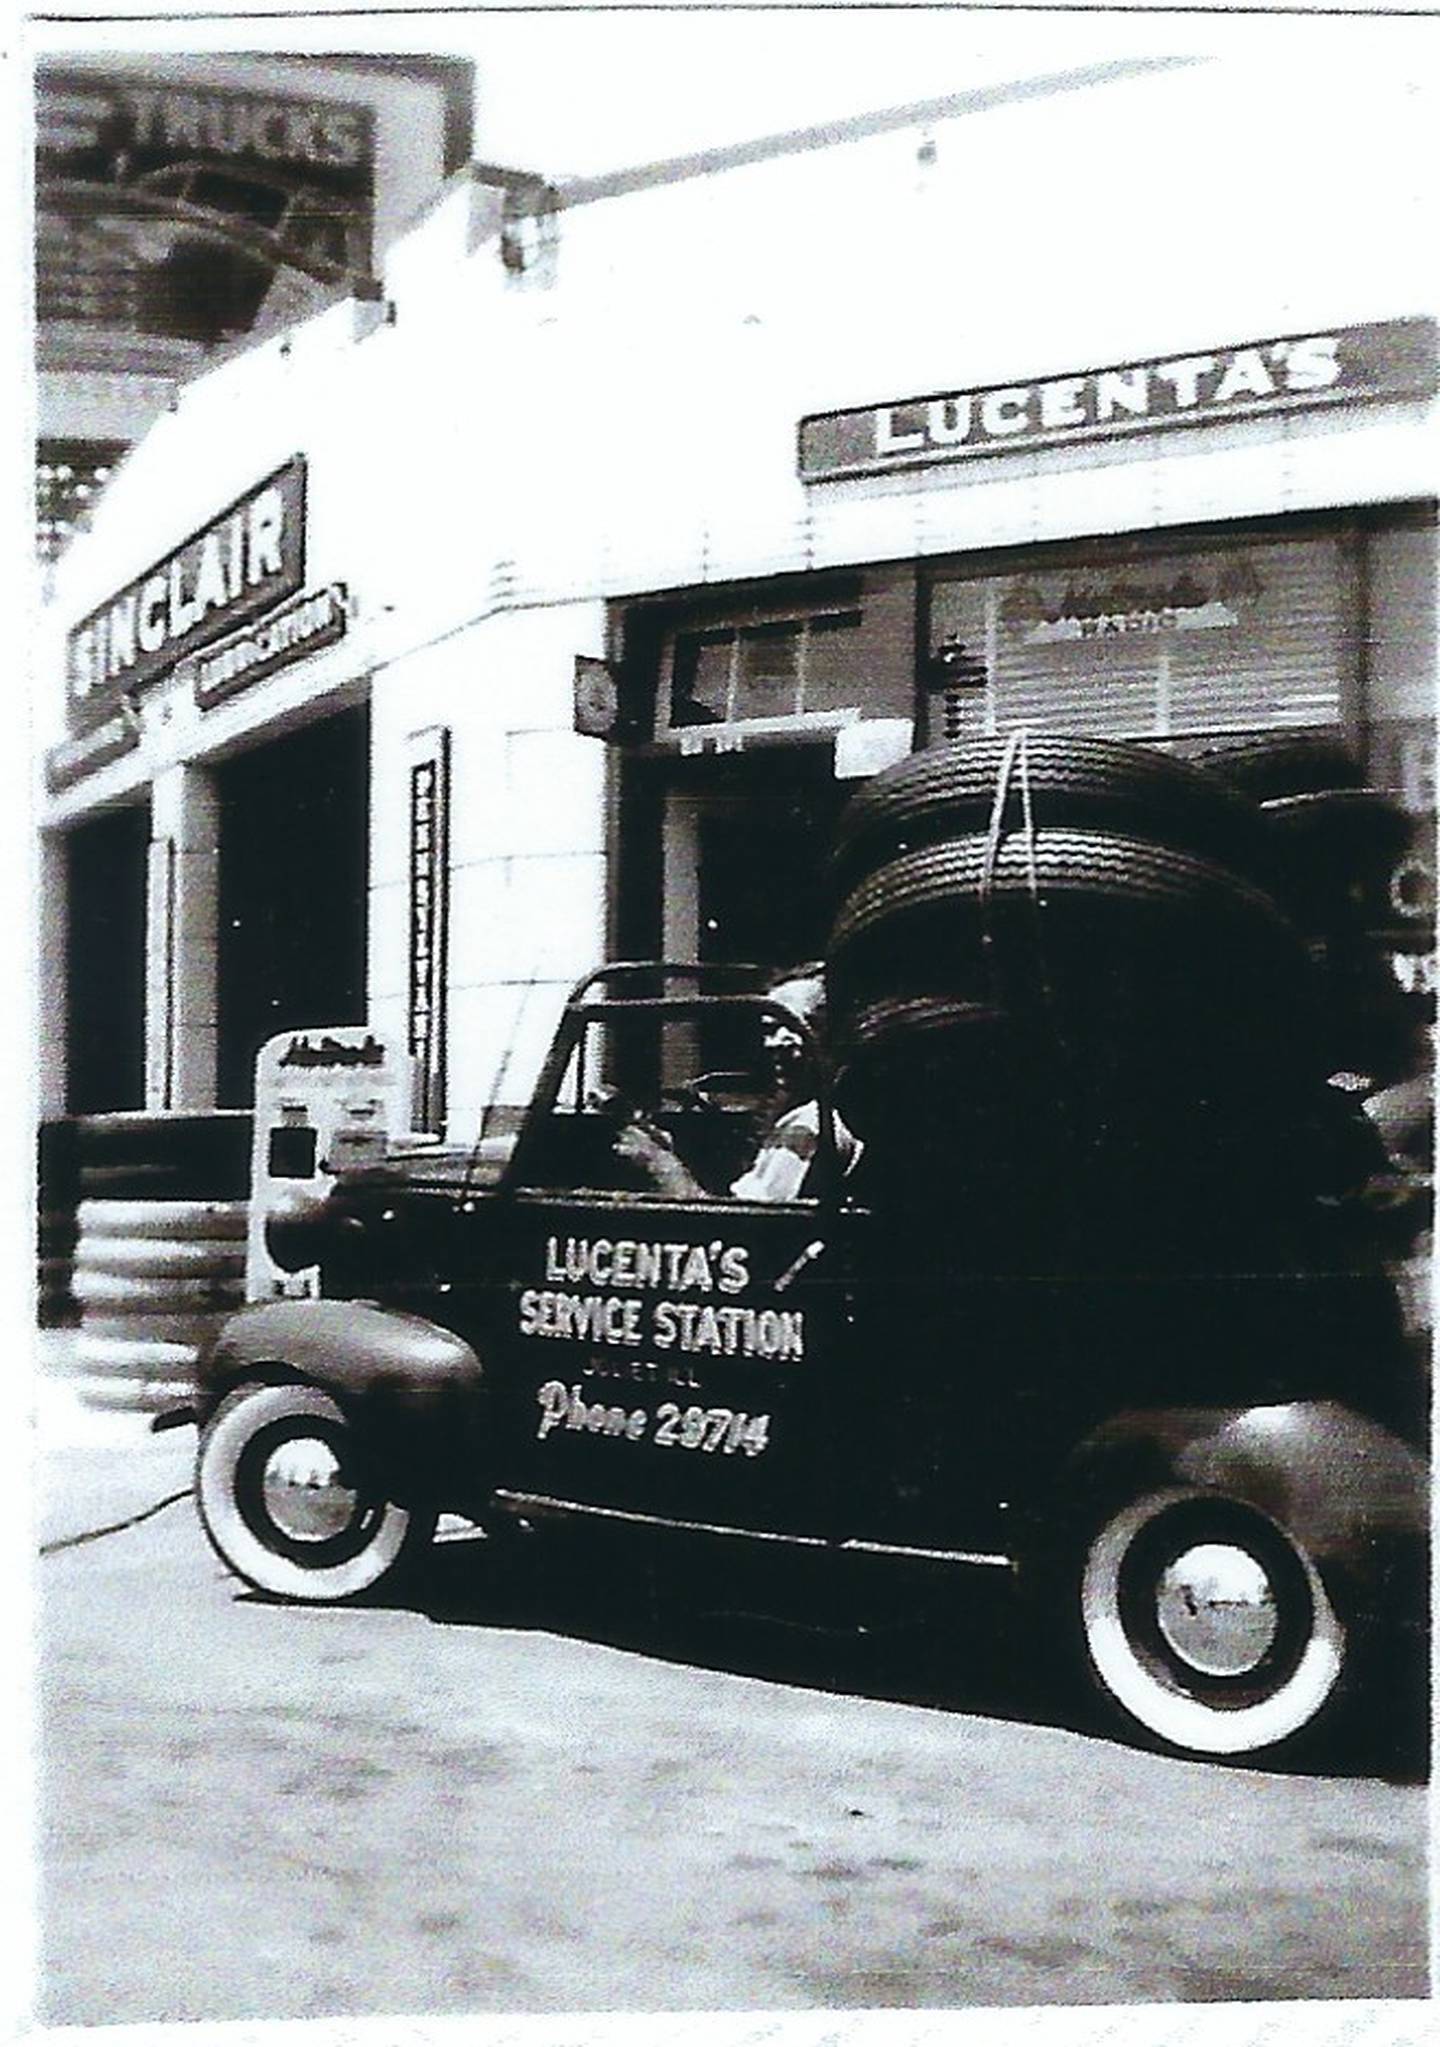 John Lucenta Sr. started Lucenta Tire in Will County 75 years ago, after coming to the U.S. from Italy as a boy not knowing how to speak English. The last of its six locations closed for good on May 25 due to high rent. Pictured is Lucenta's three-pump gas at its Jefferson Street and Eastern Avenue location in Joliet in the 1940s.